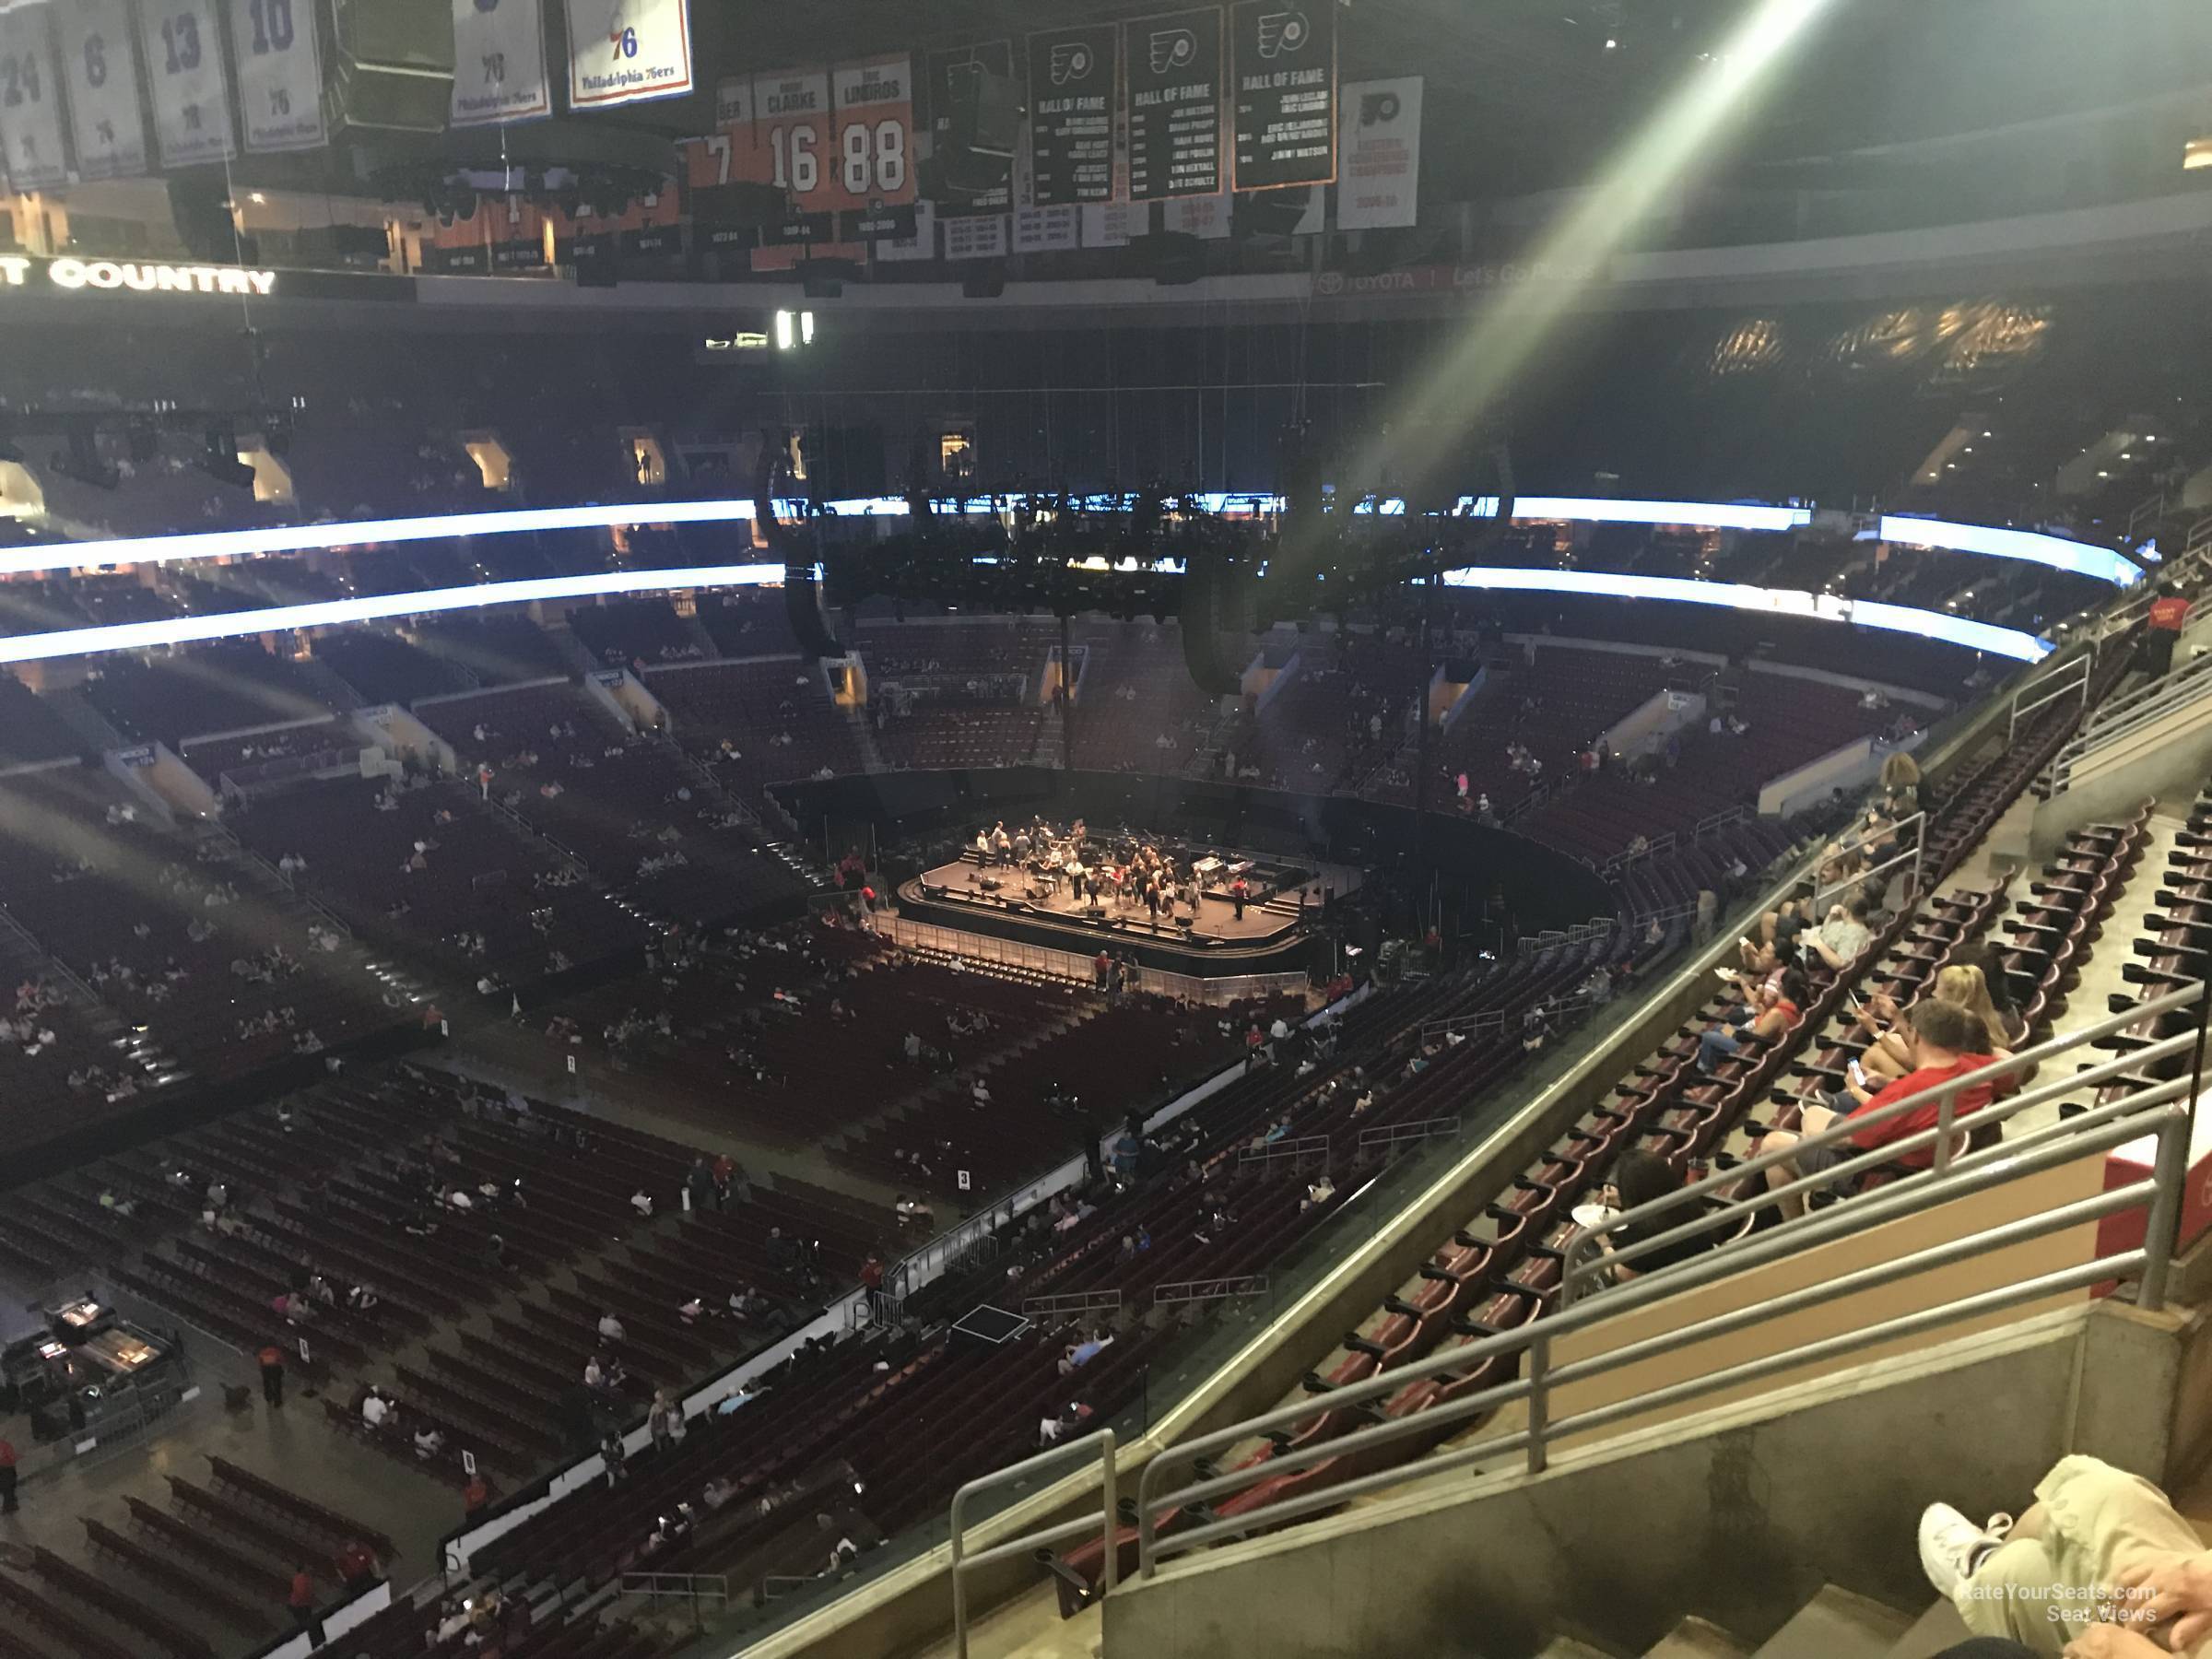 section 210a, row 7 seat view  for concert - wells fargo center